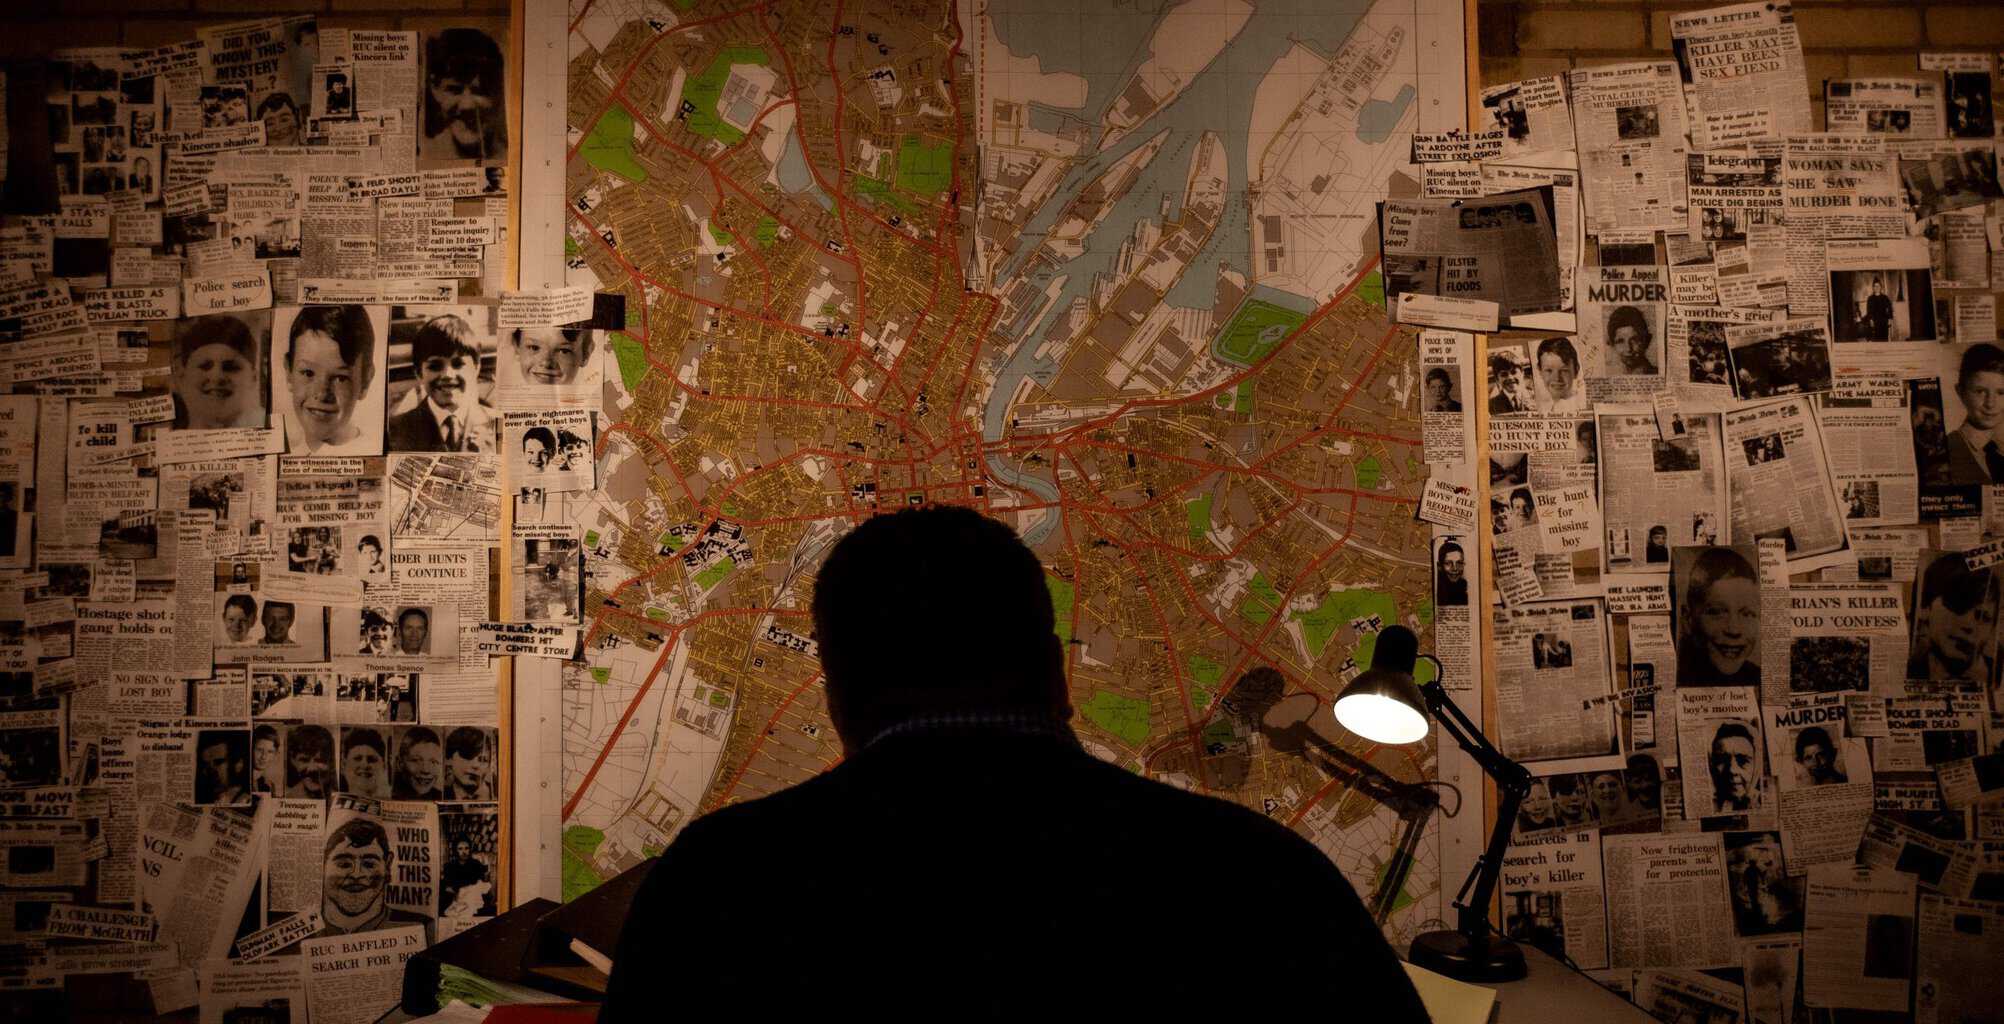 Shadow of a man set against a spotlighted map of Belfast streets with pictures and clippings from newspapers pinned to the wall in front of him